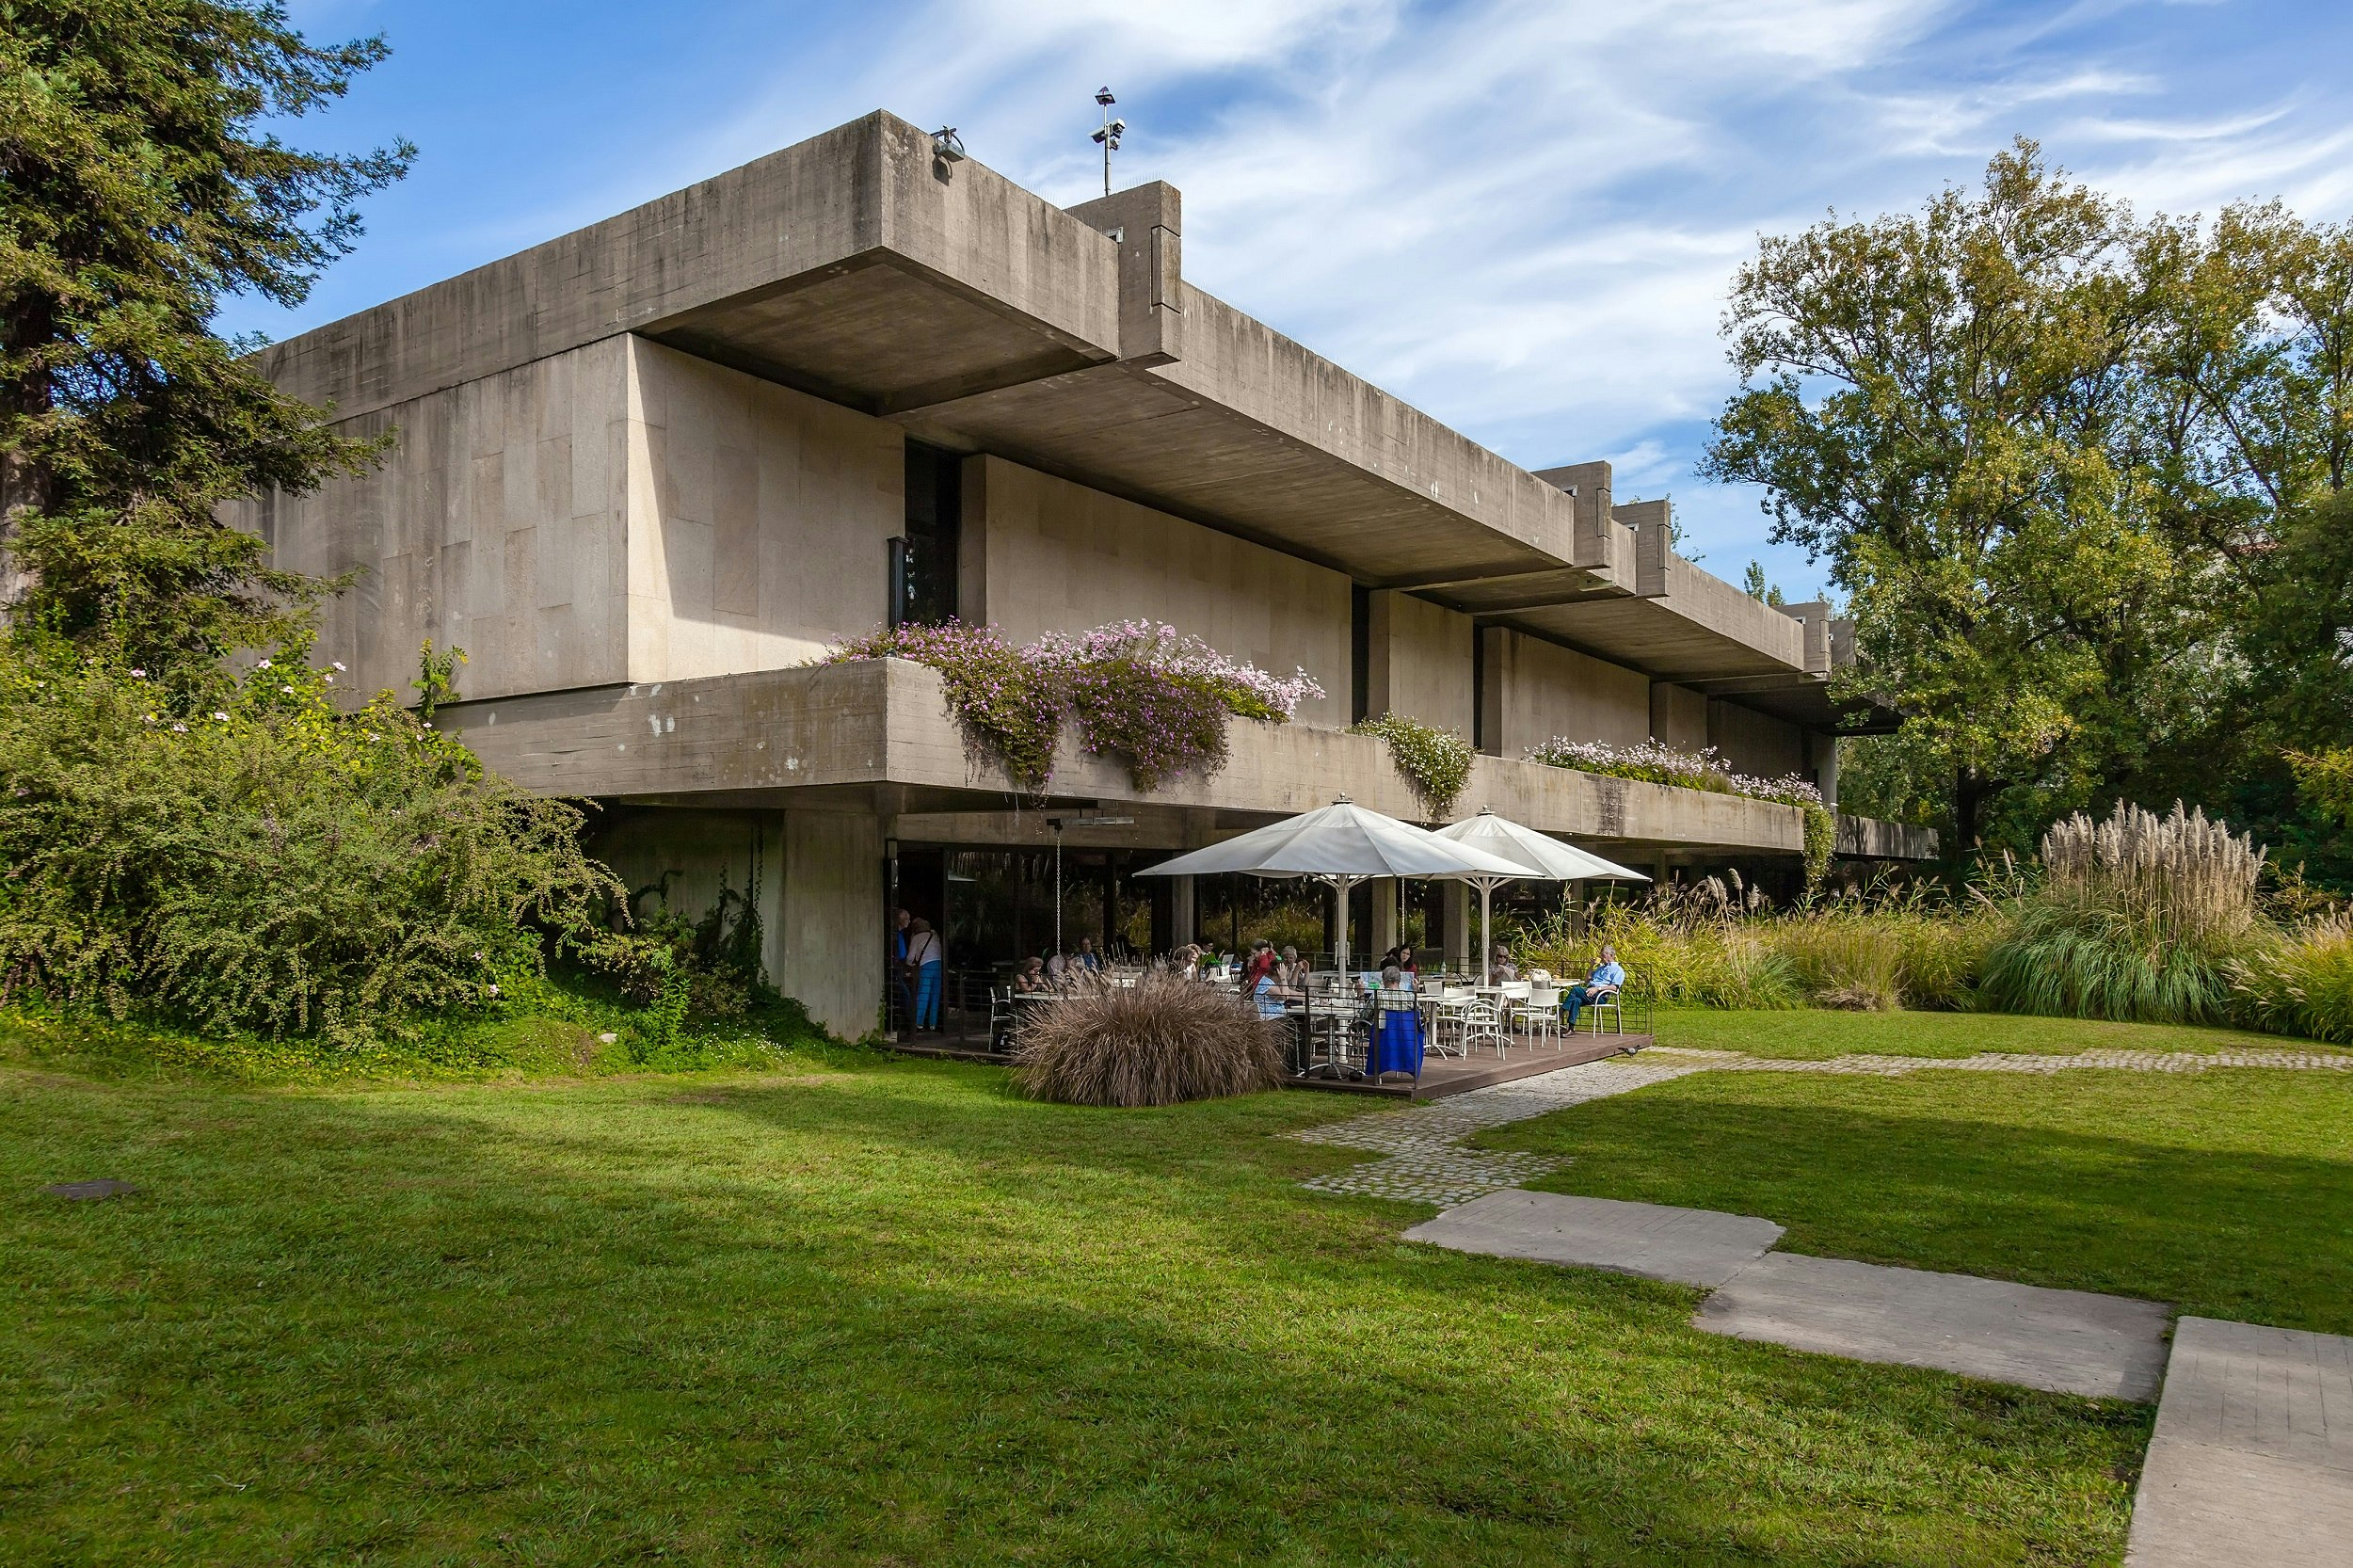 A manicured lawn and large trees surround the brutalist concrete structure of the Calouste Gulbenkian foundation; on the ground level is a cafe with table seating under large umbrellas on a patio.